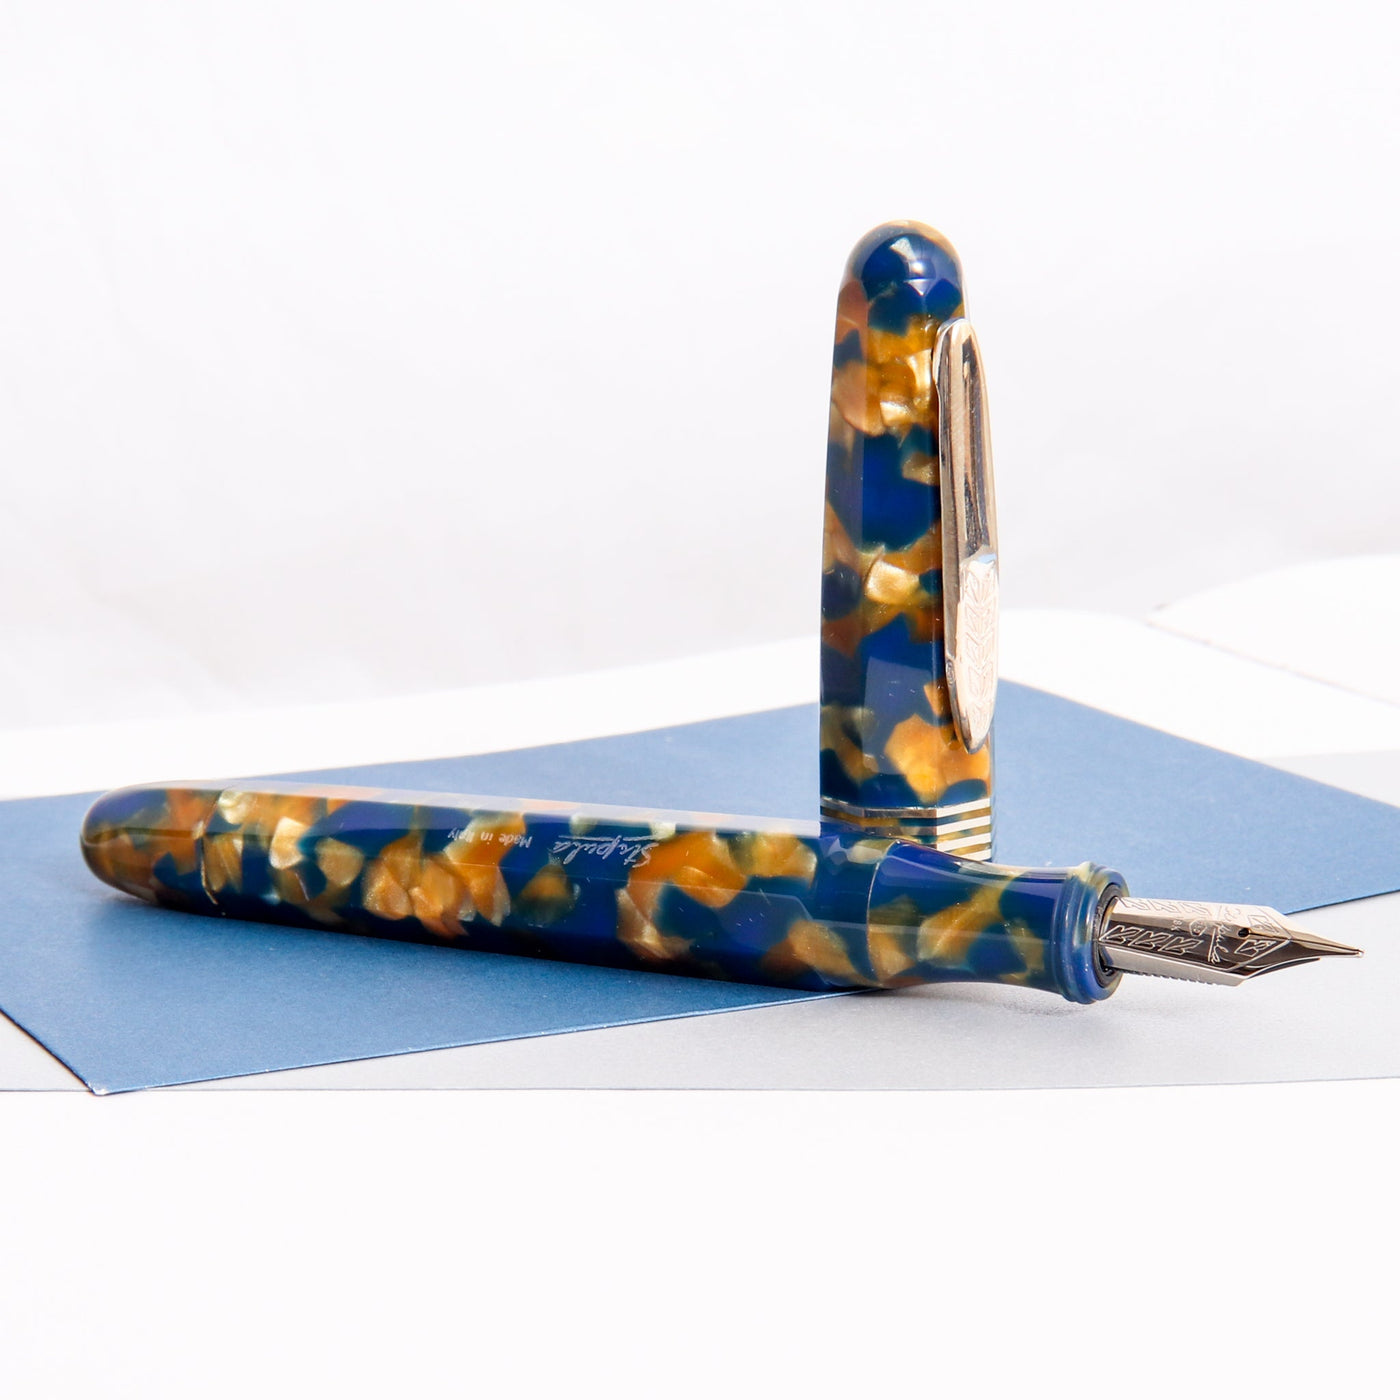 Stipula Etruria Faceted Champagne Fountain Pen Blue And Tan Resin.jpg